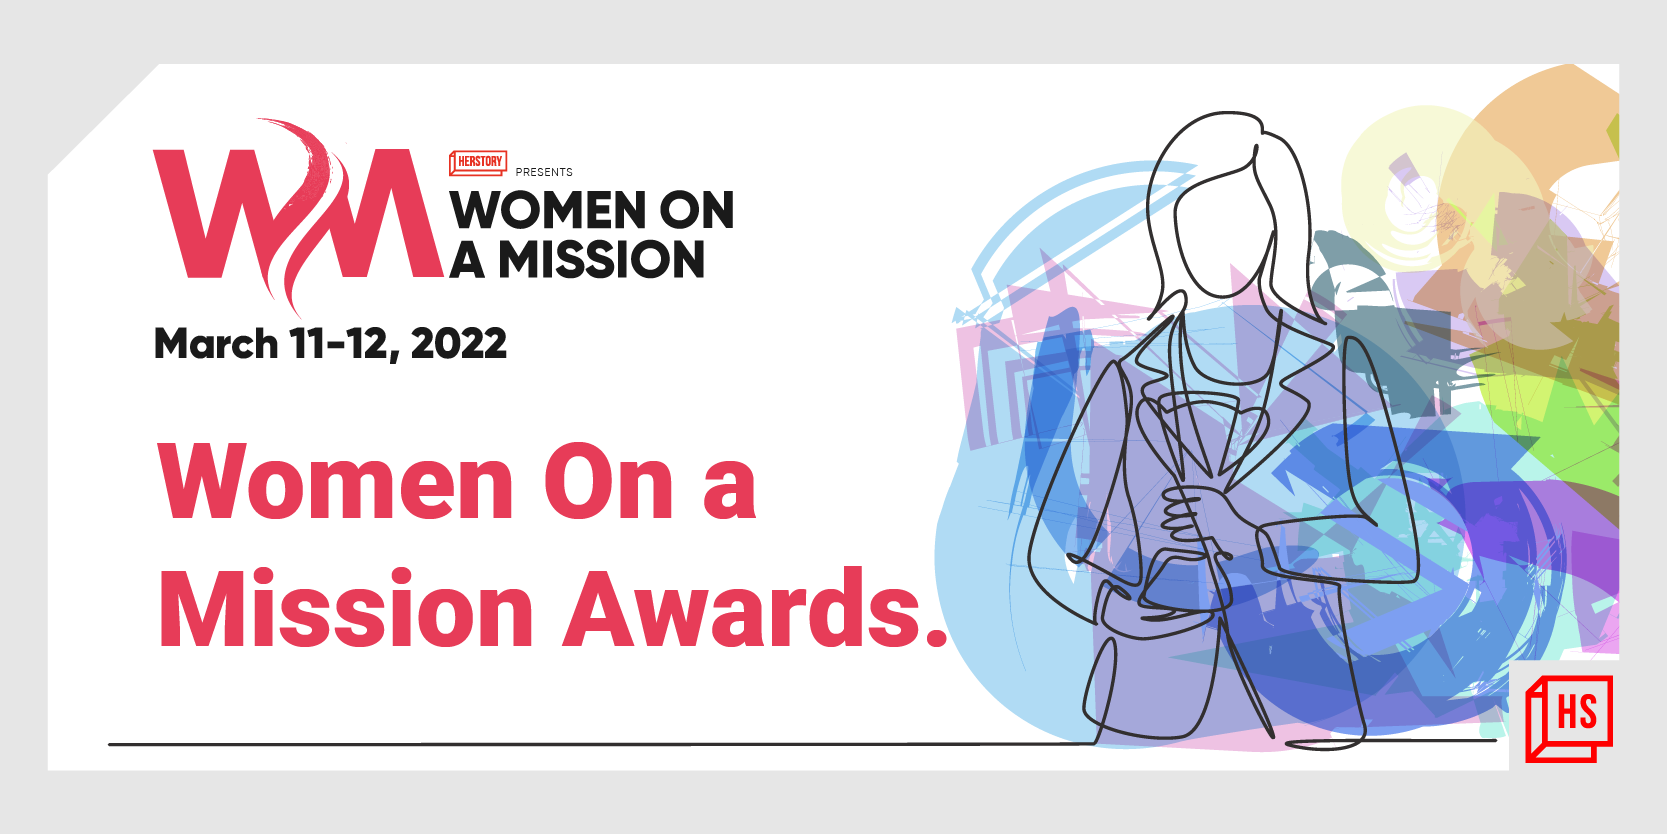 Are you a female changemaker or know one? Apply for HerStory's Women on a Mission Awards 2022